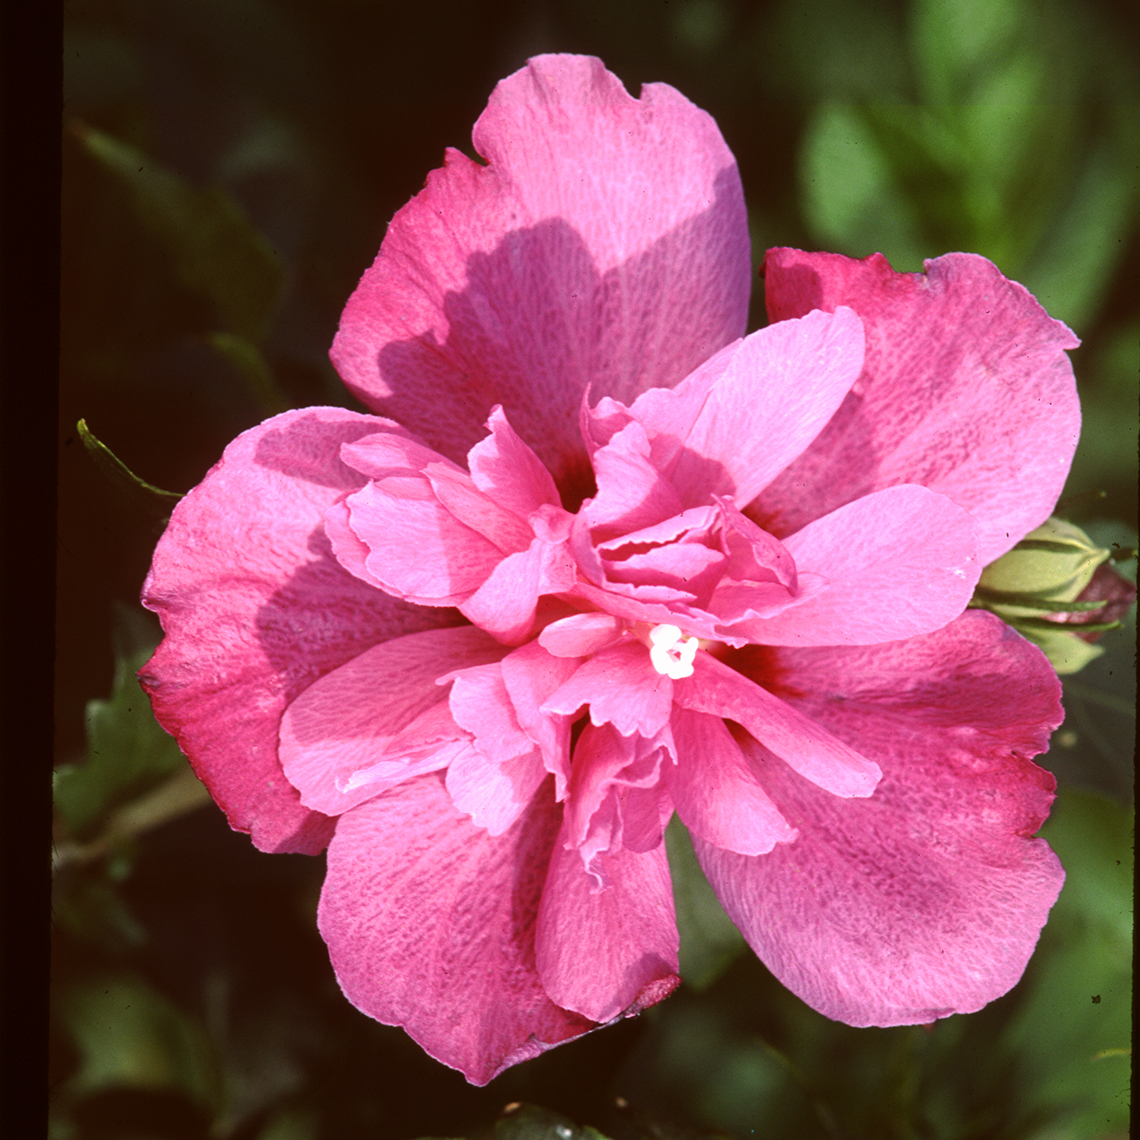 A single bloom of Sanchoyo rose of Sharon showing its deep pink red color